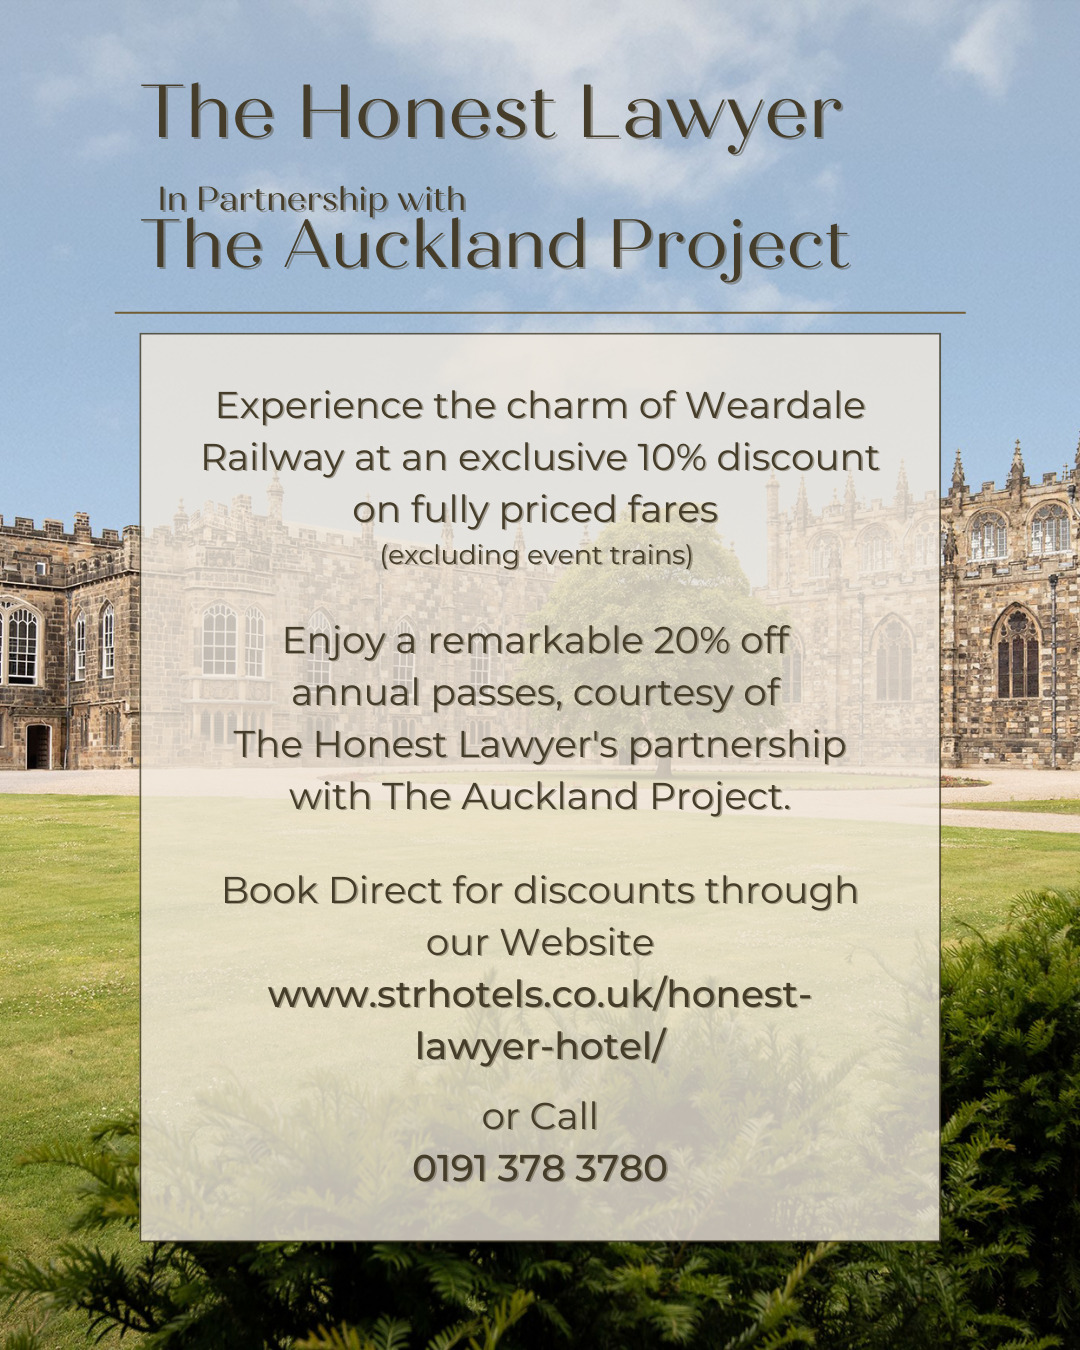 The Auckland Project